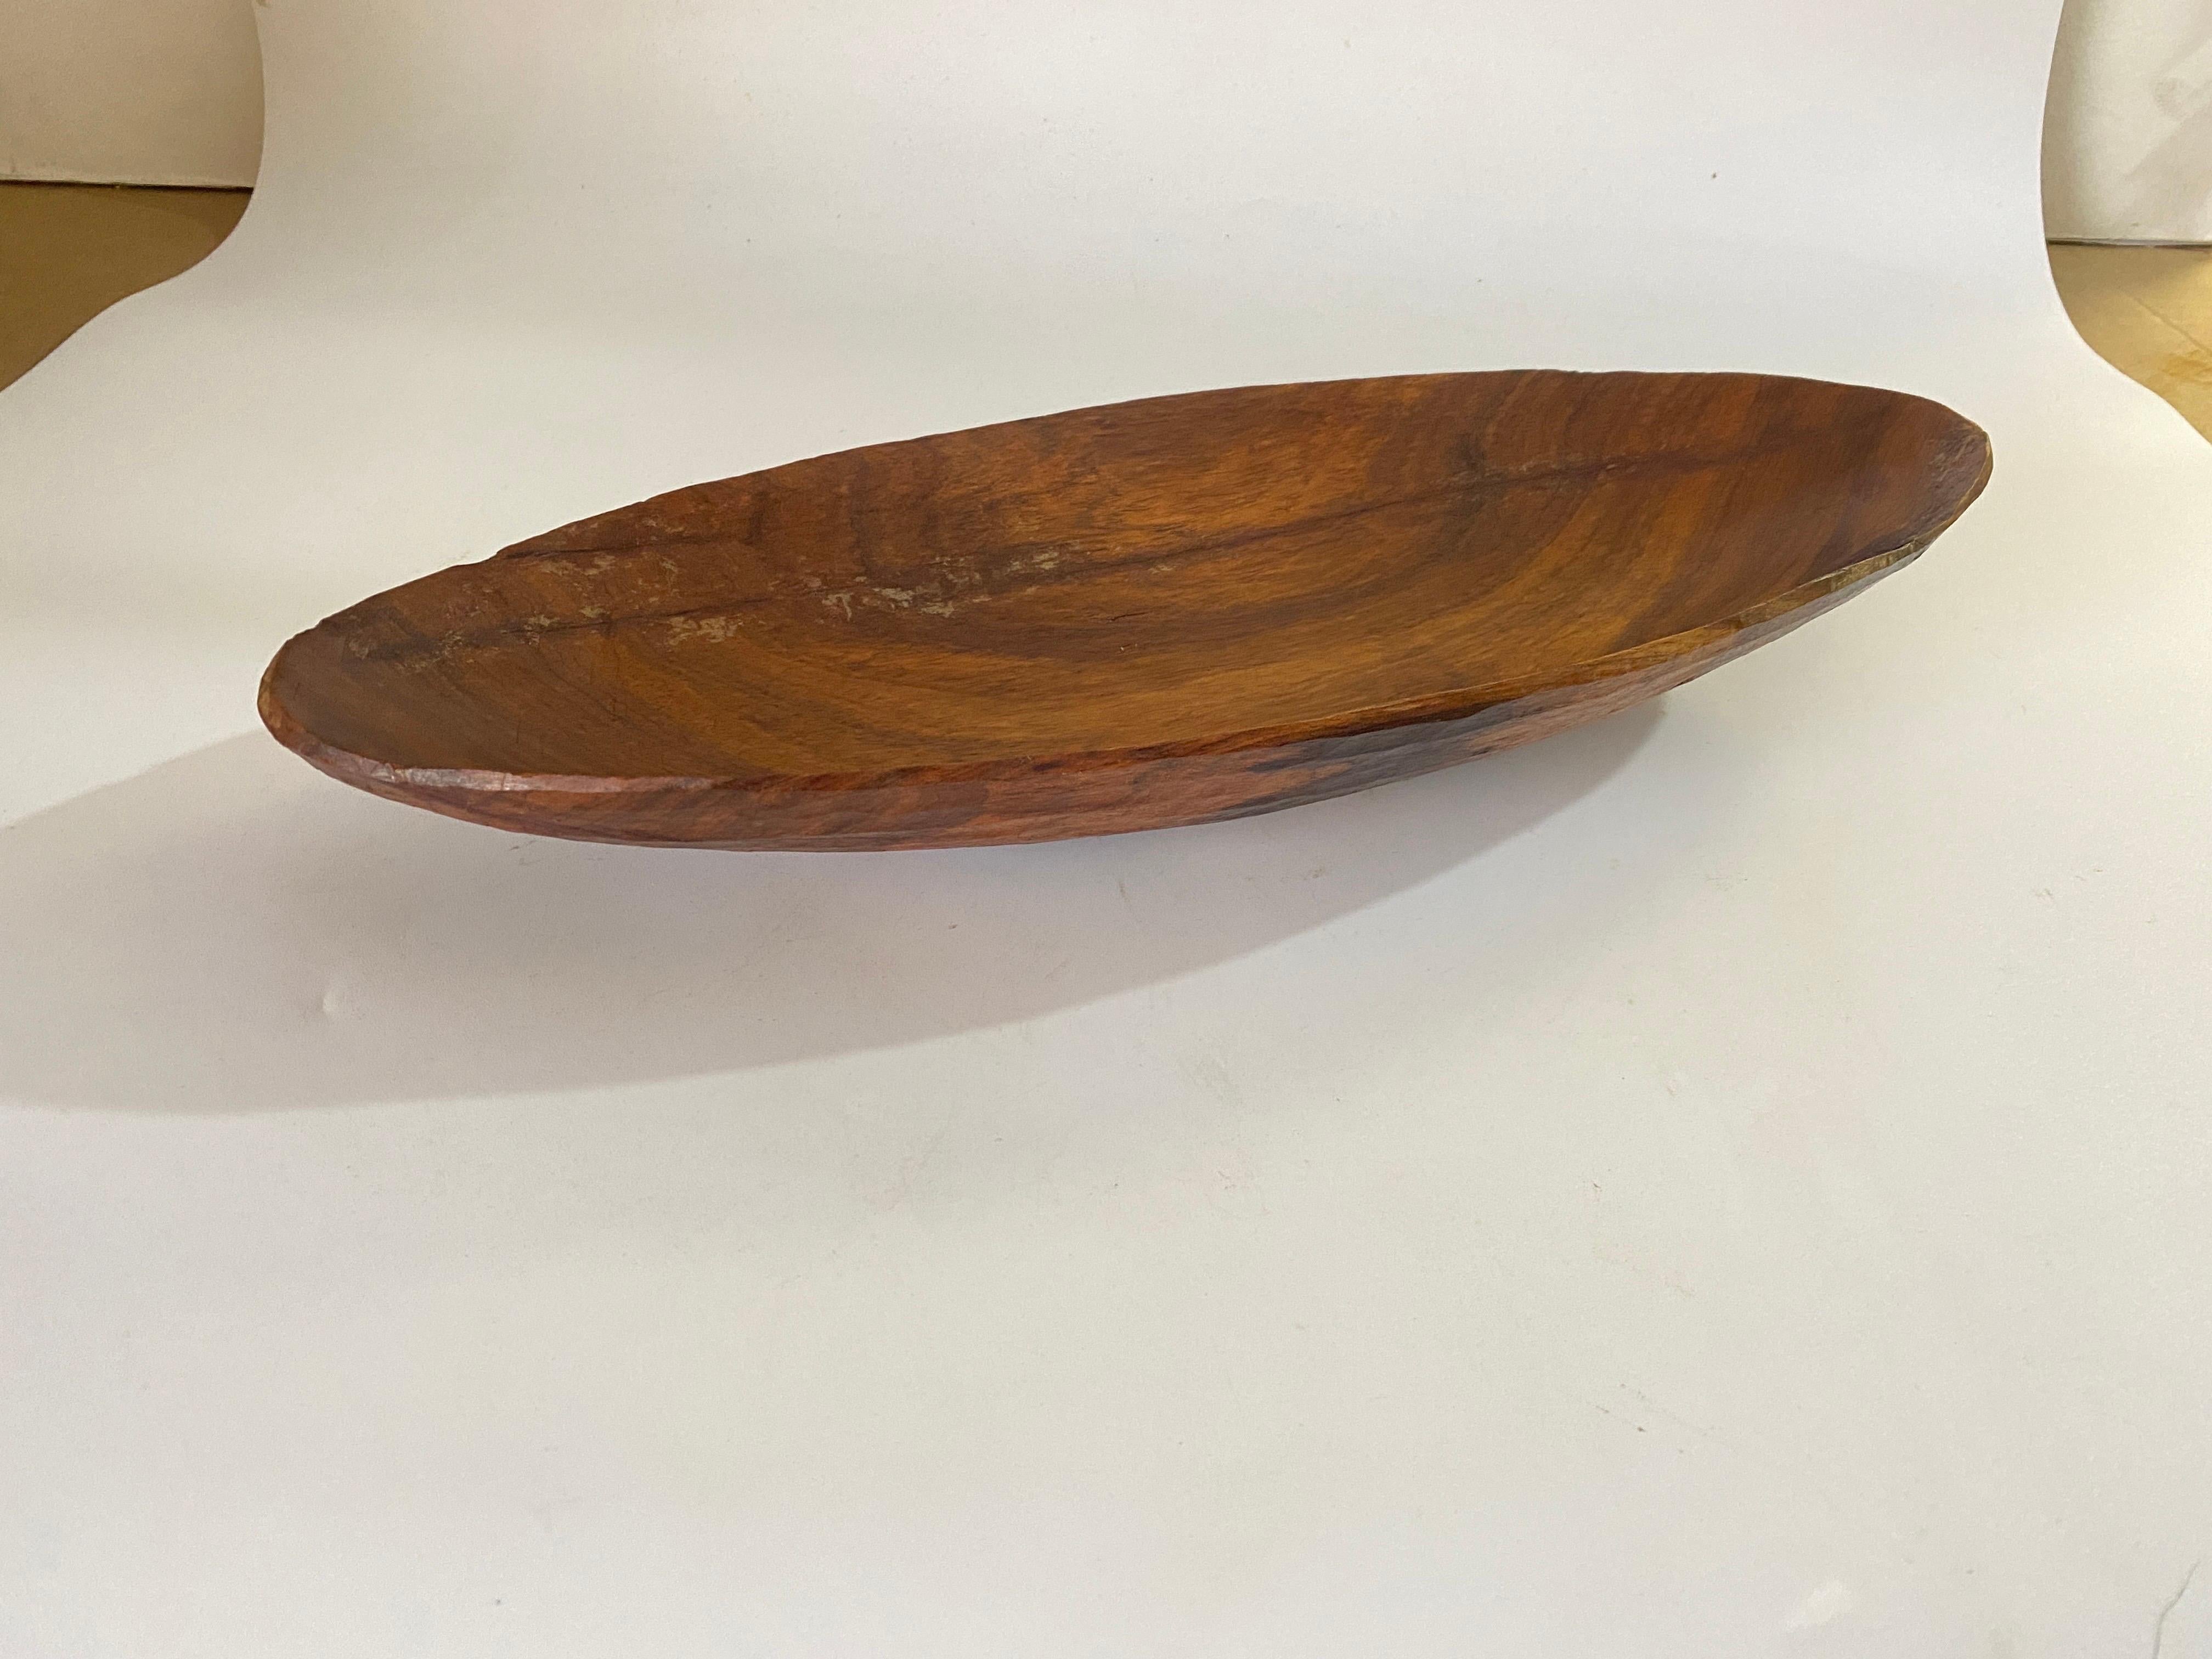 Brutalist Wood Bowl, Large, in a Brown Patina, France, circa 1960 For Sale 2